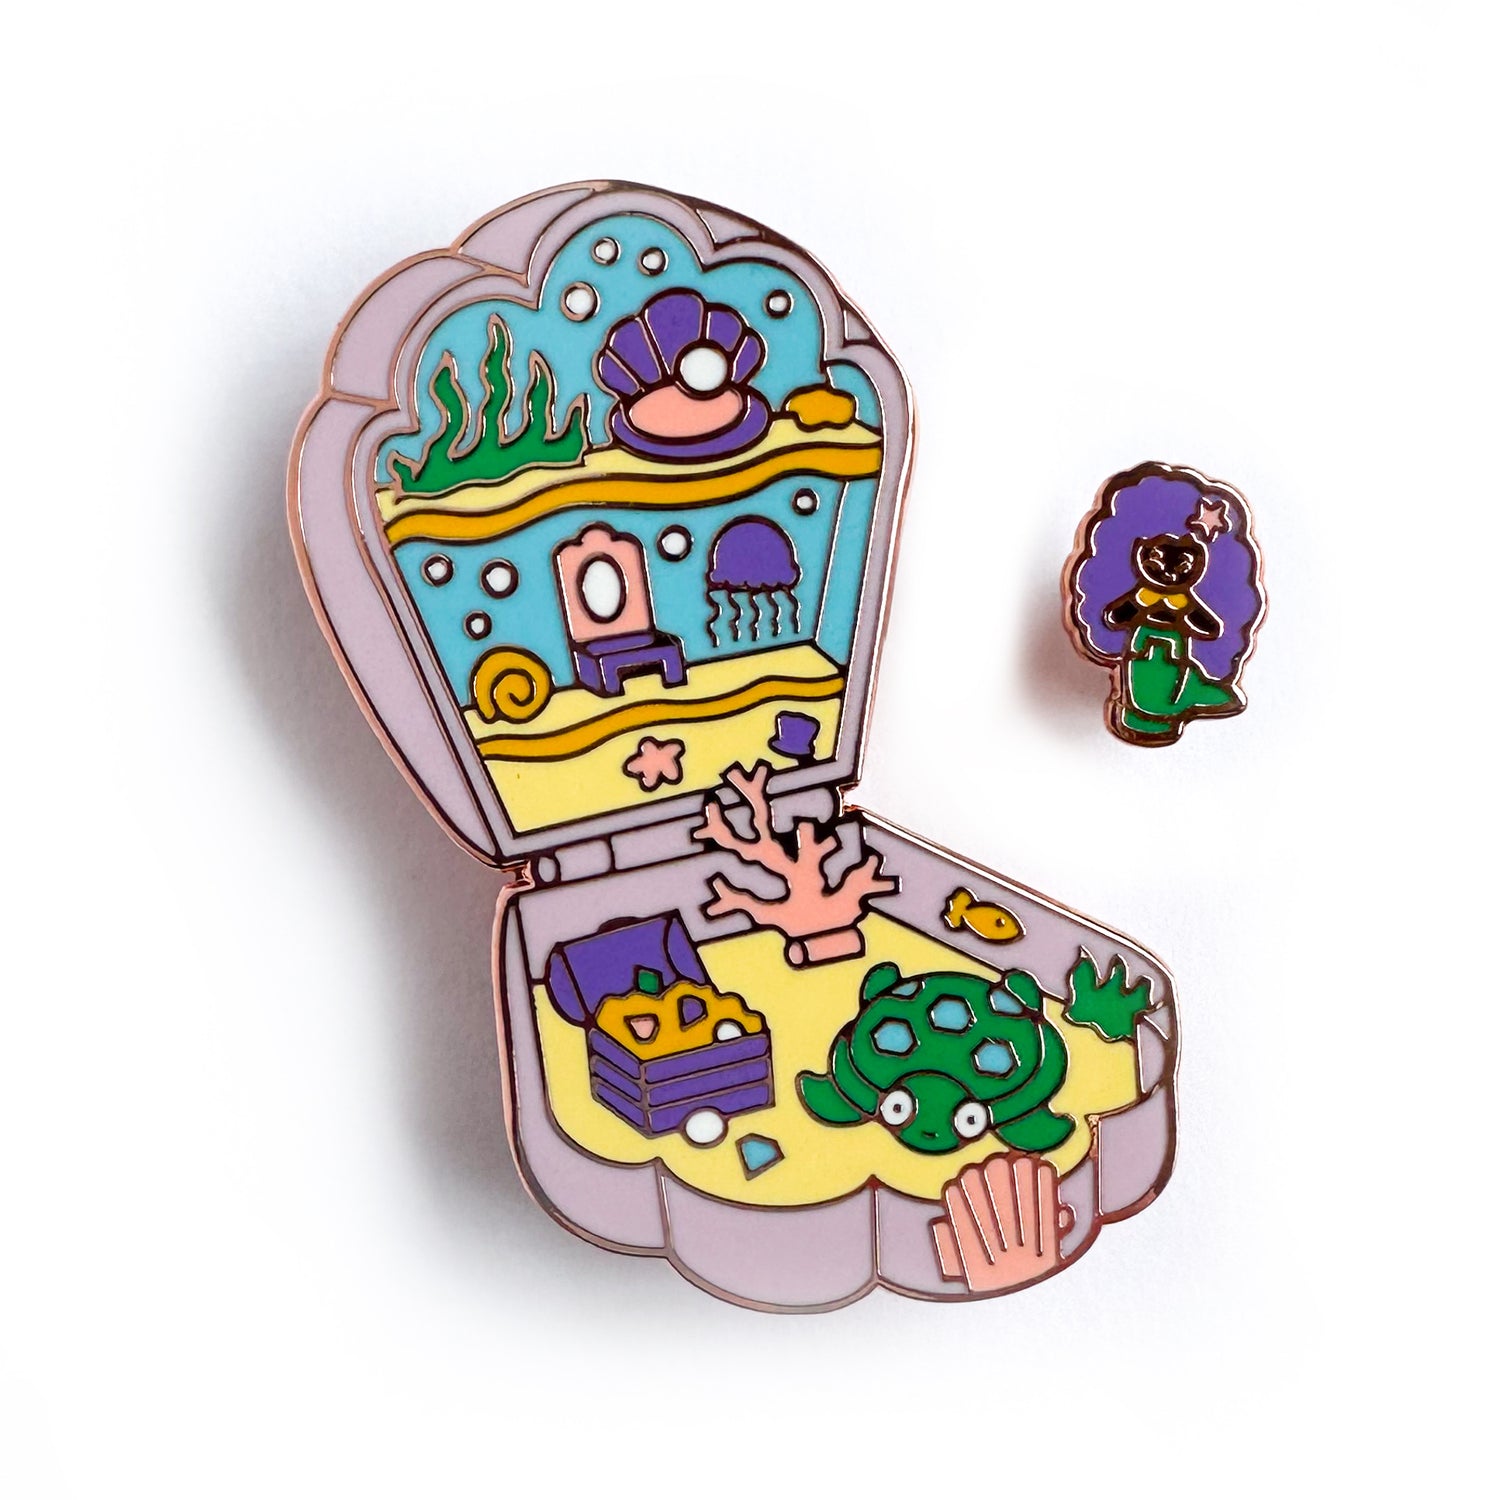 These are colored stickers of a treasure chest and a seashell